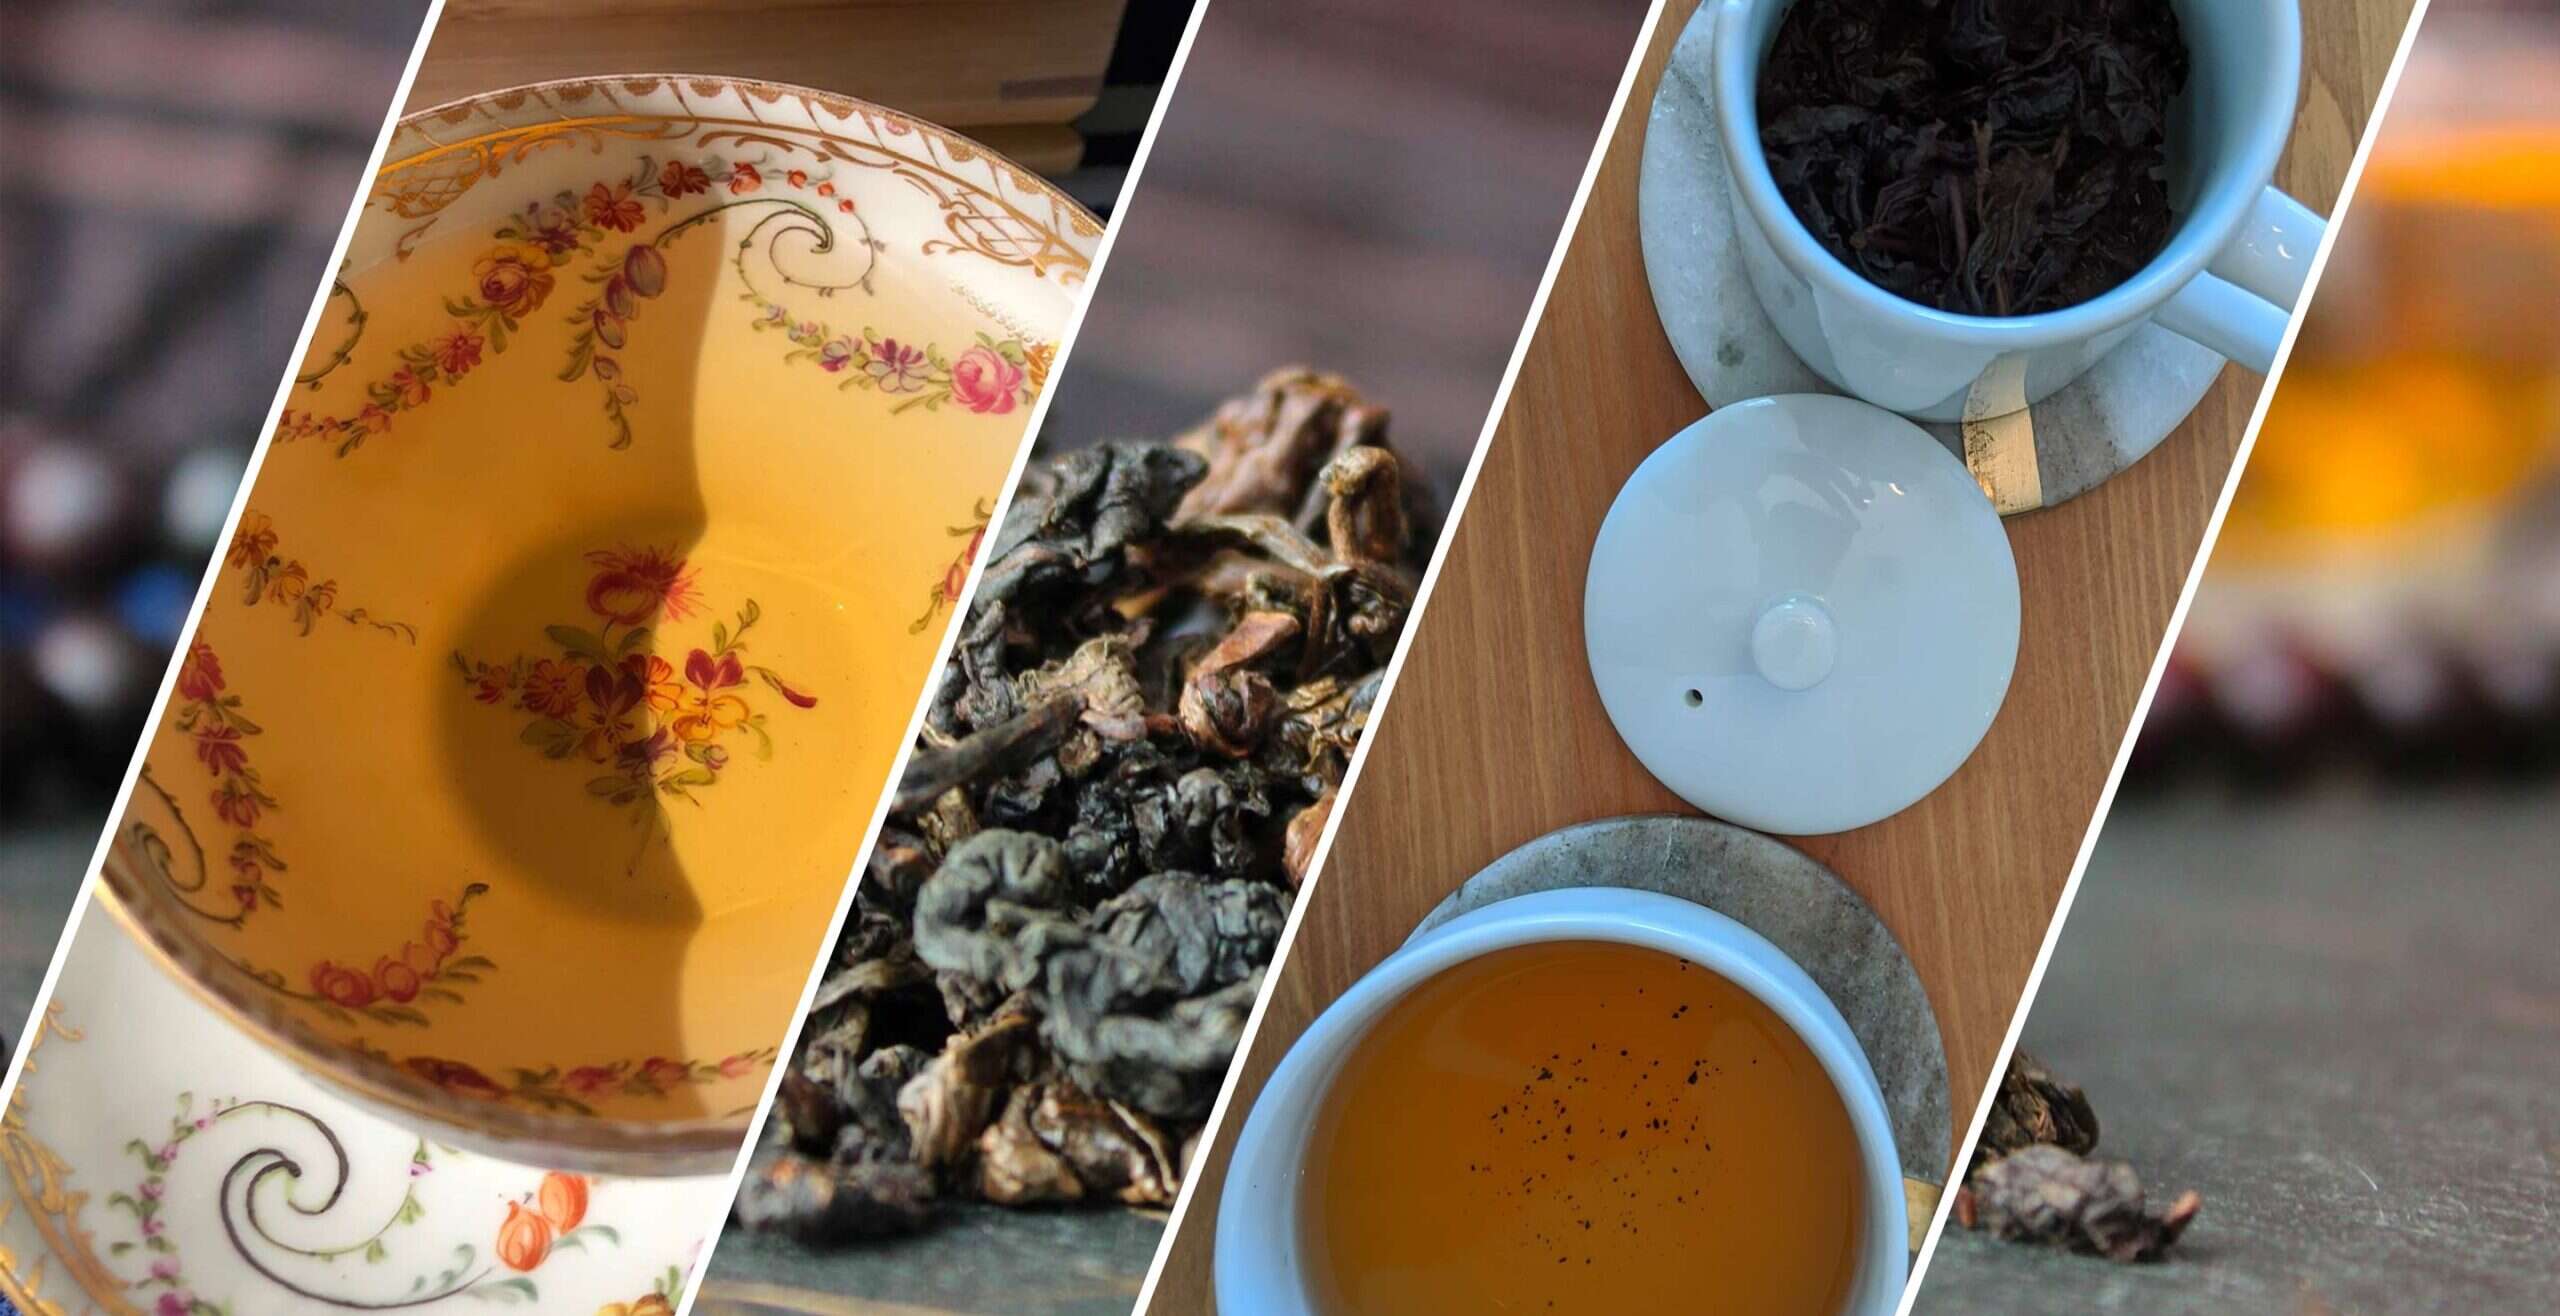 Community Tasting Journal: 2000 Aged Tieguanyin